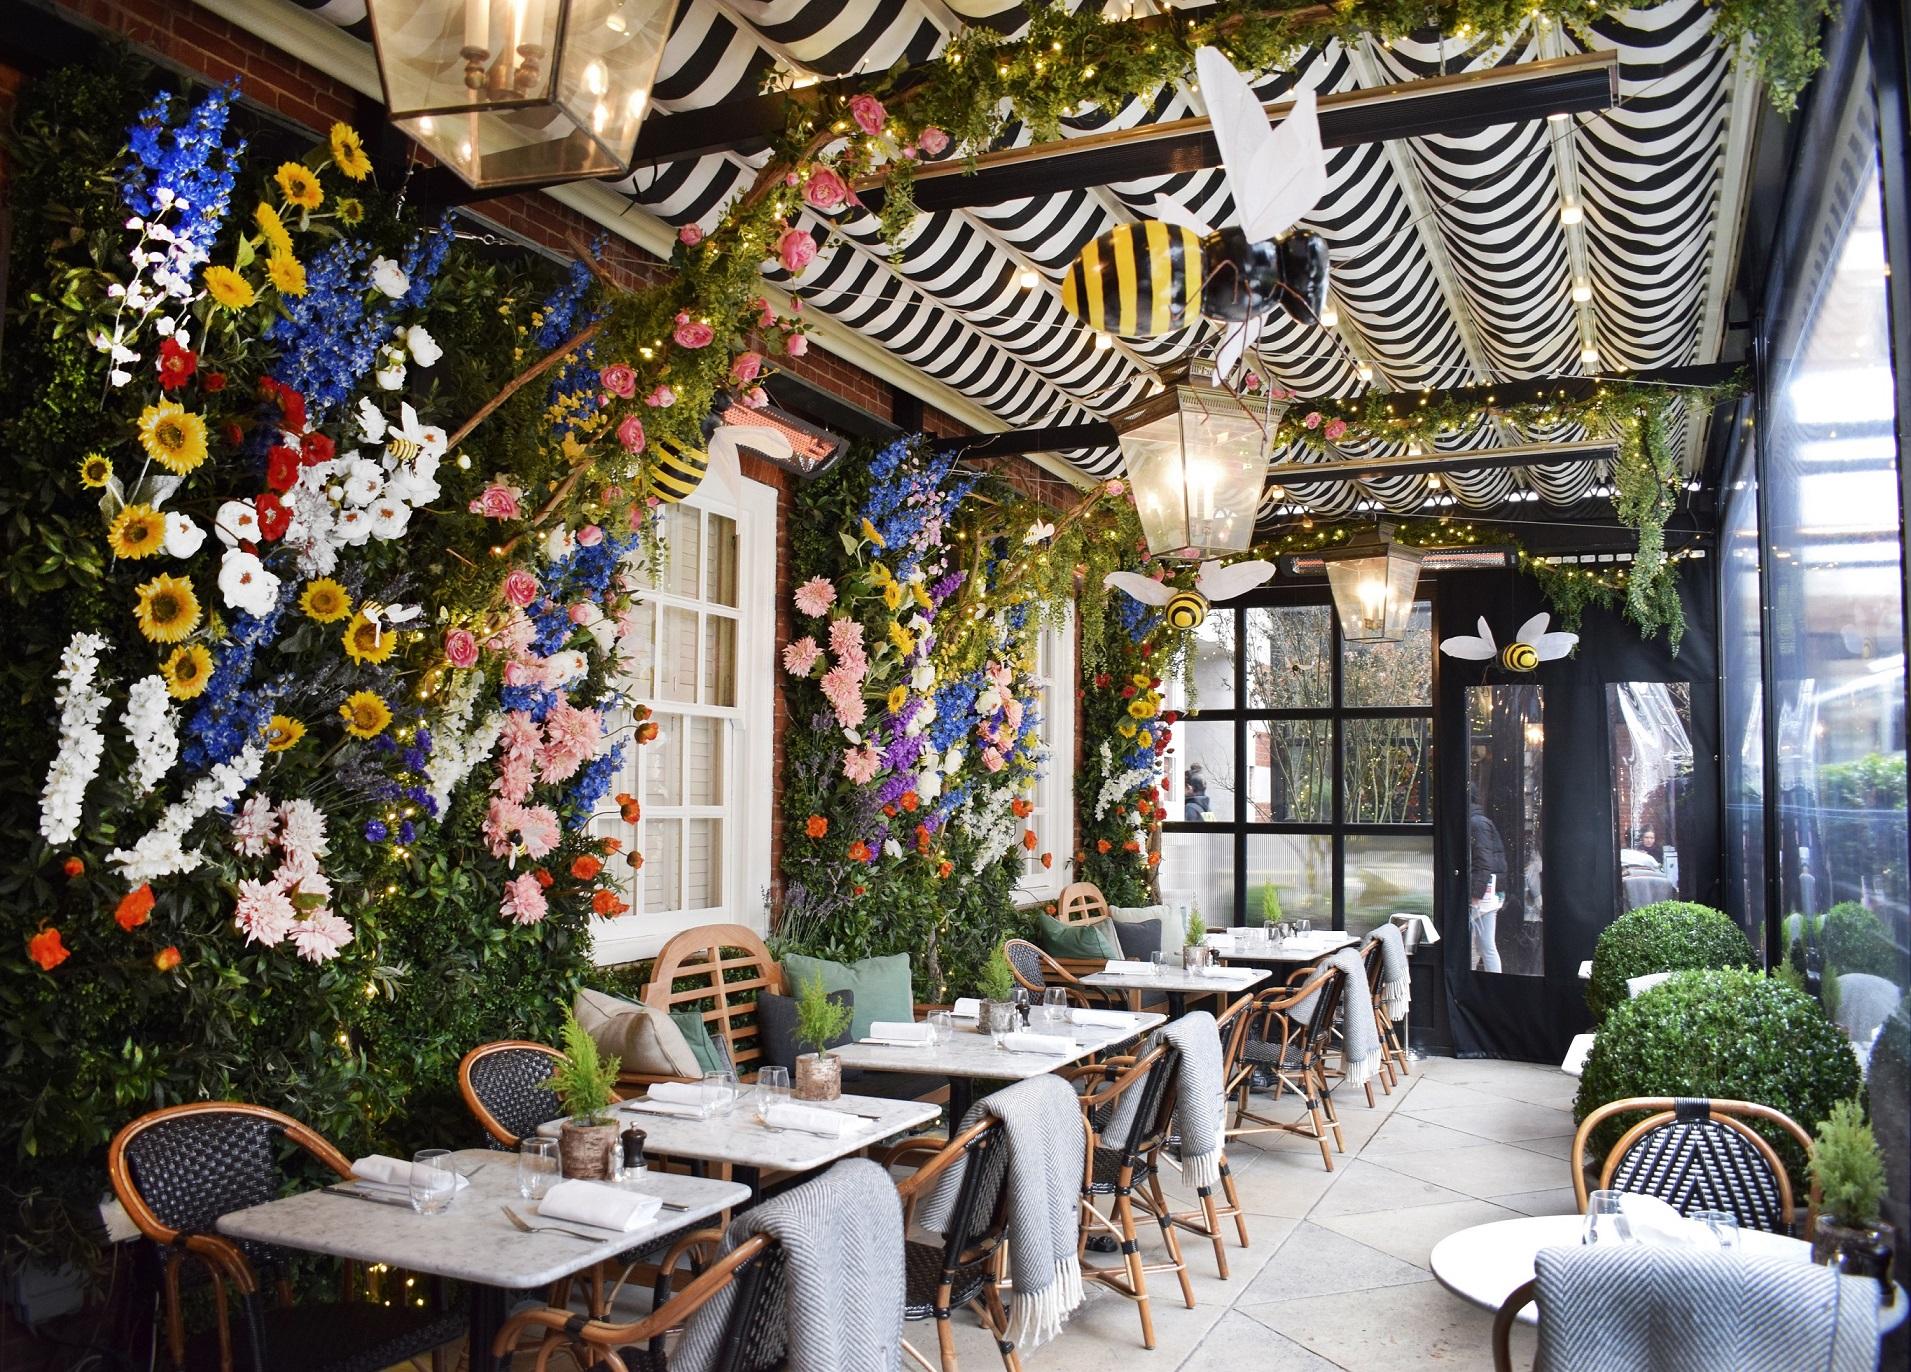 Master florist Nikki Tibbles Wild at Heart gave the Terrace a spring makeover